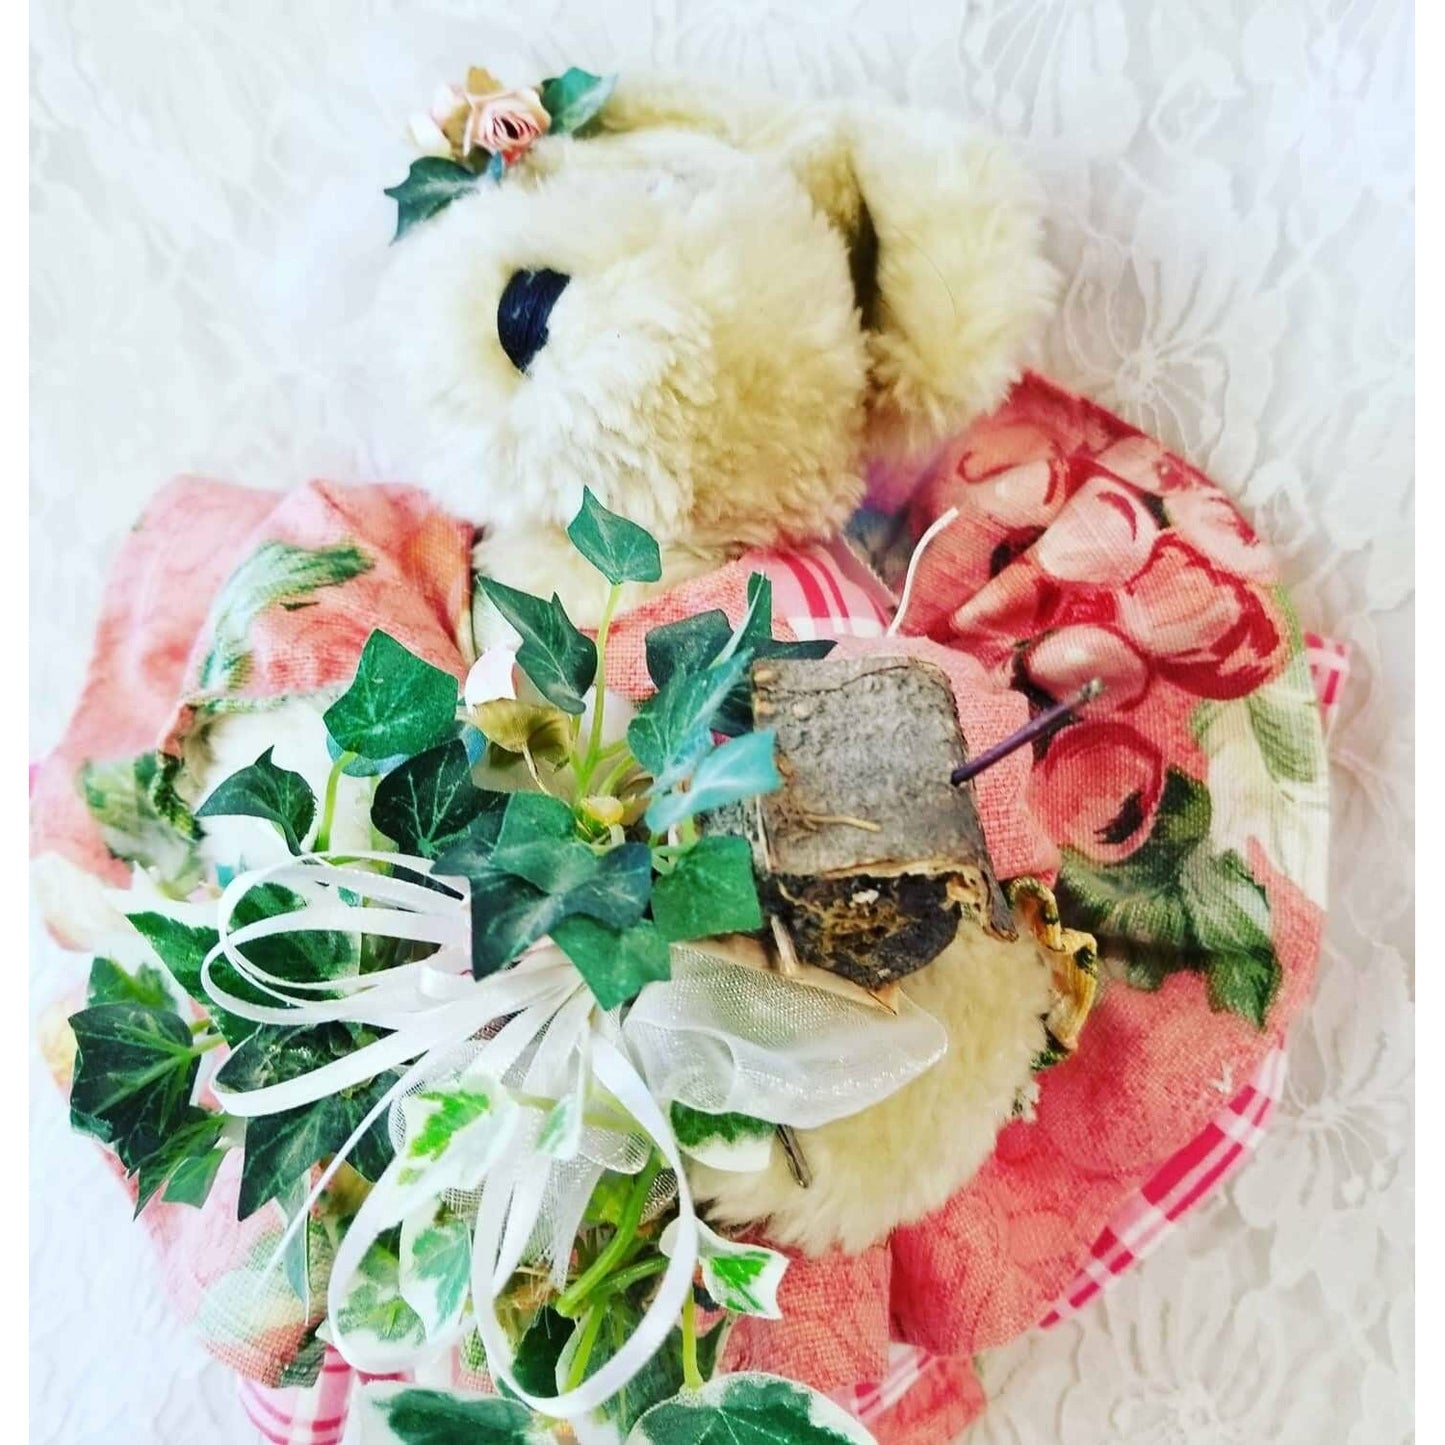 Handmade Teddy Bear ~ OOAK Jointed Art Bear w/ Birdhouse in Hand ~ Jointed, Handmade ~ Unique and Original